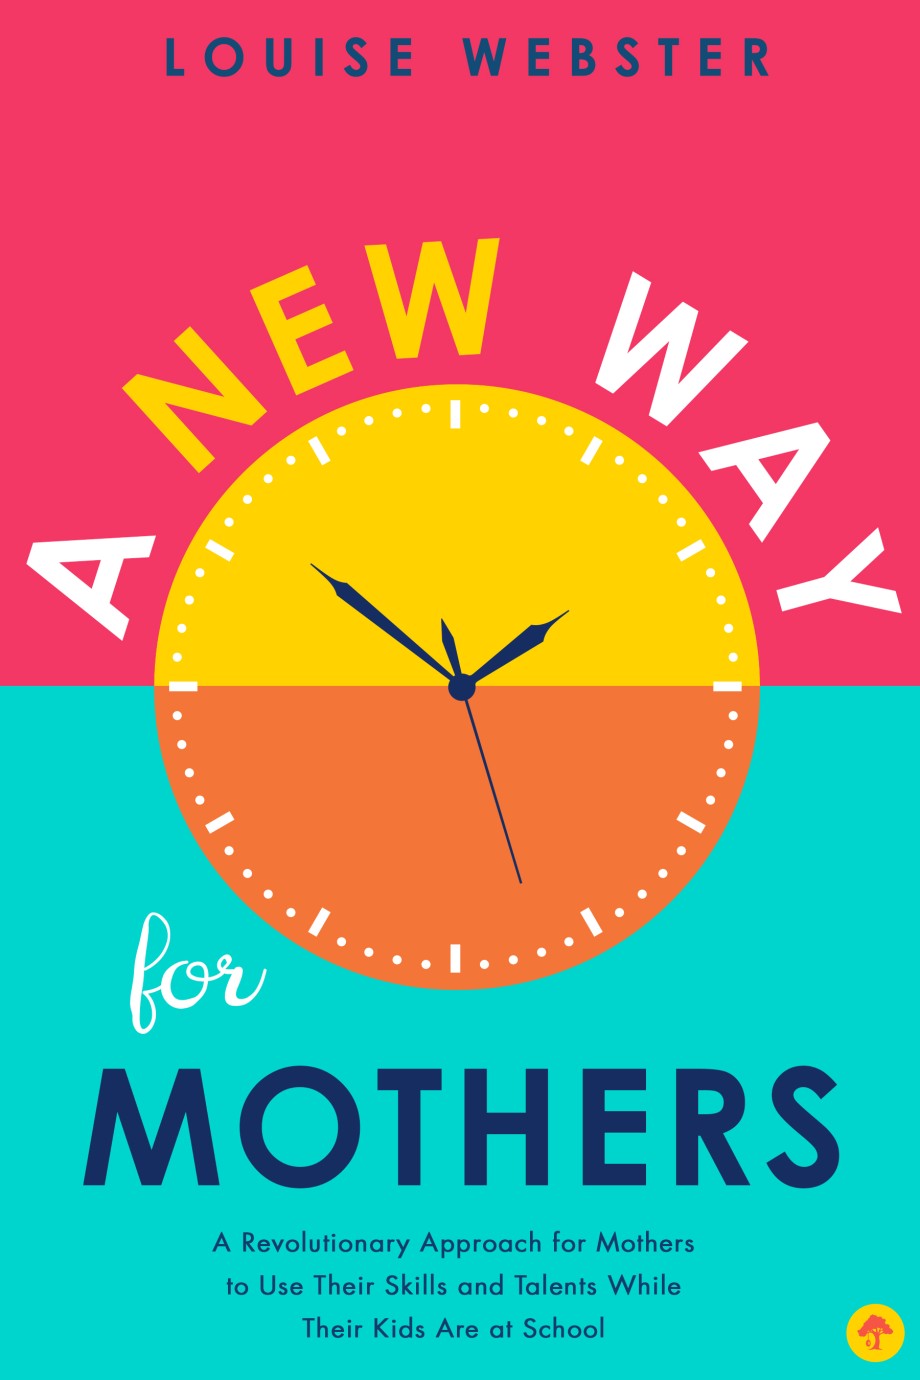 New Way for Mothers A Revolutionary Approach for Mothers to Use Their Skills and Talents While Their Children Are at School